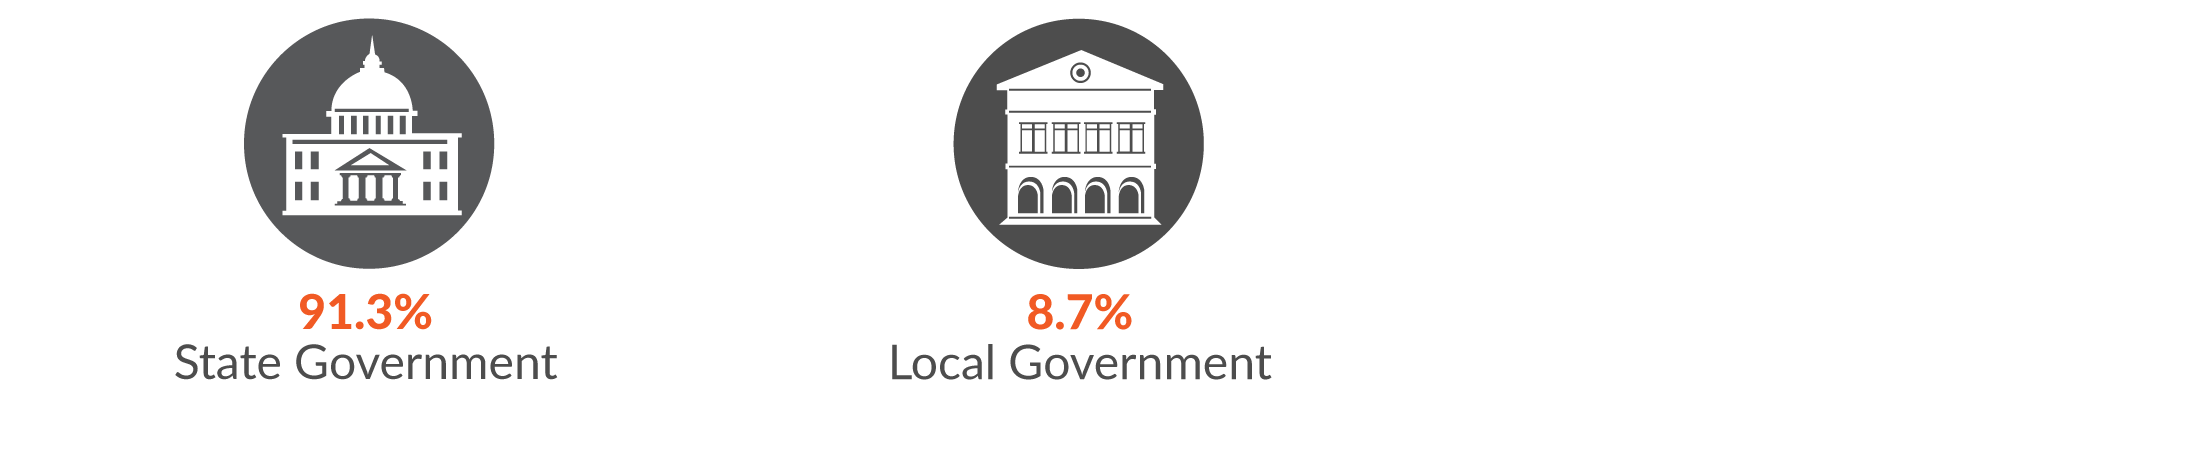 This infographic shows 91.3% of Government administration & defence serious injury claims were in State Government and 8.7% in Local Government.